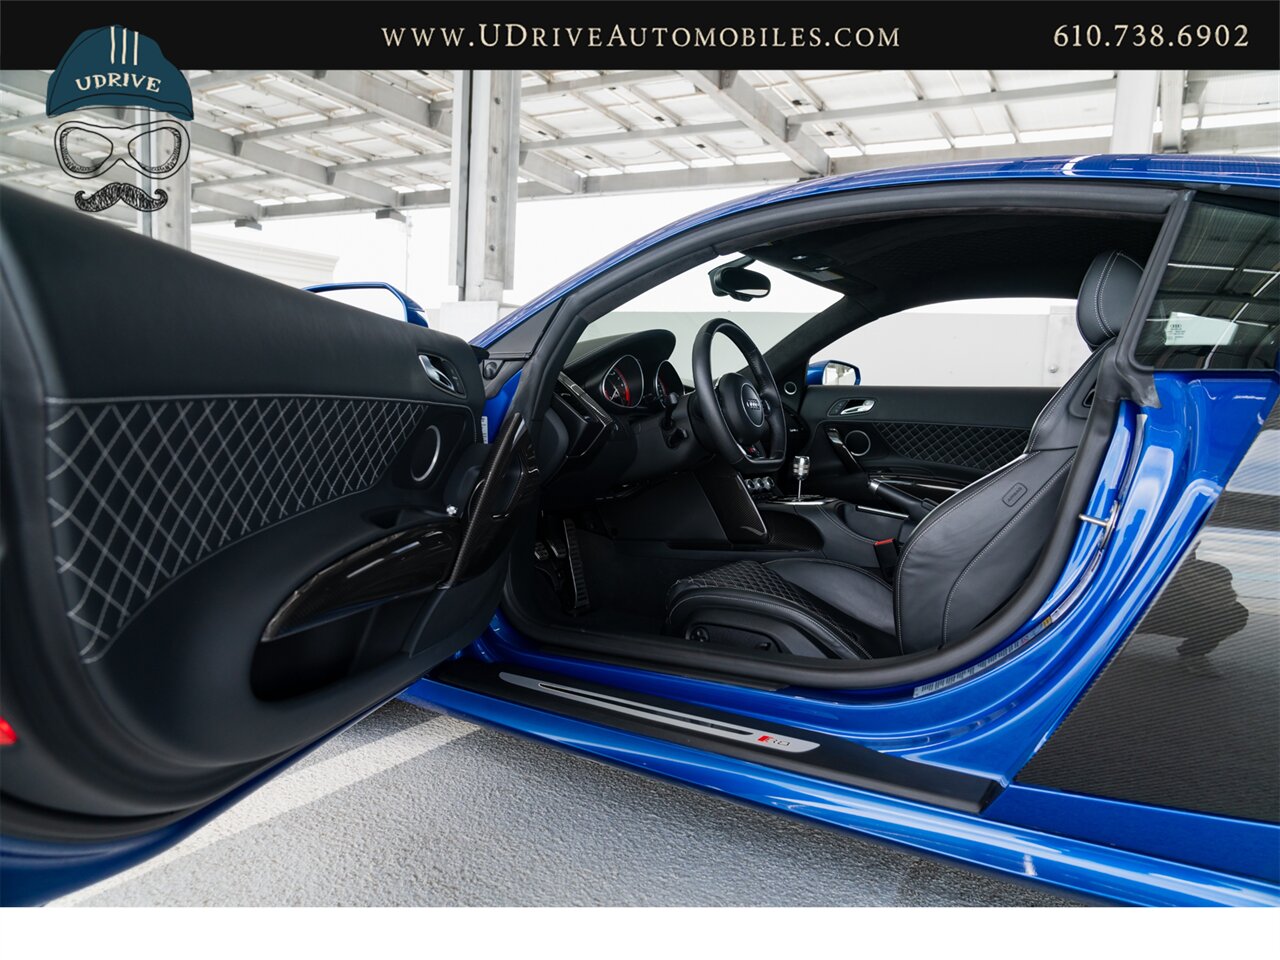 2015 Audi R8 5.2 V10 Quattro 6 Speed Manual 10k Miles  Diamond Stitched Leather 1 of 2 - Photo 25 - West Chester, PA 19382